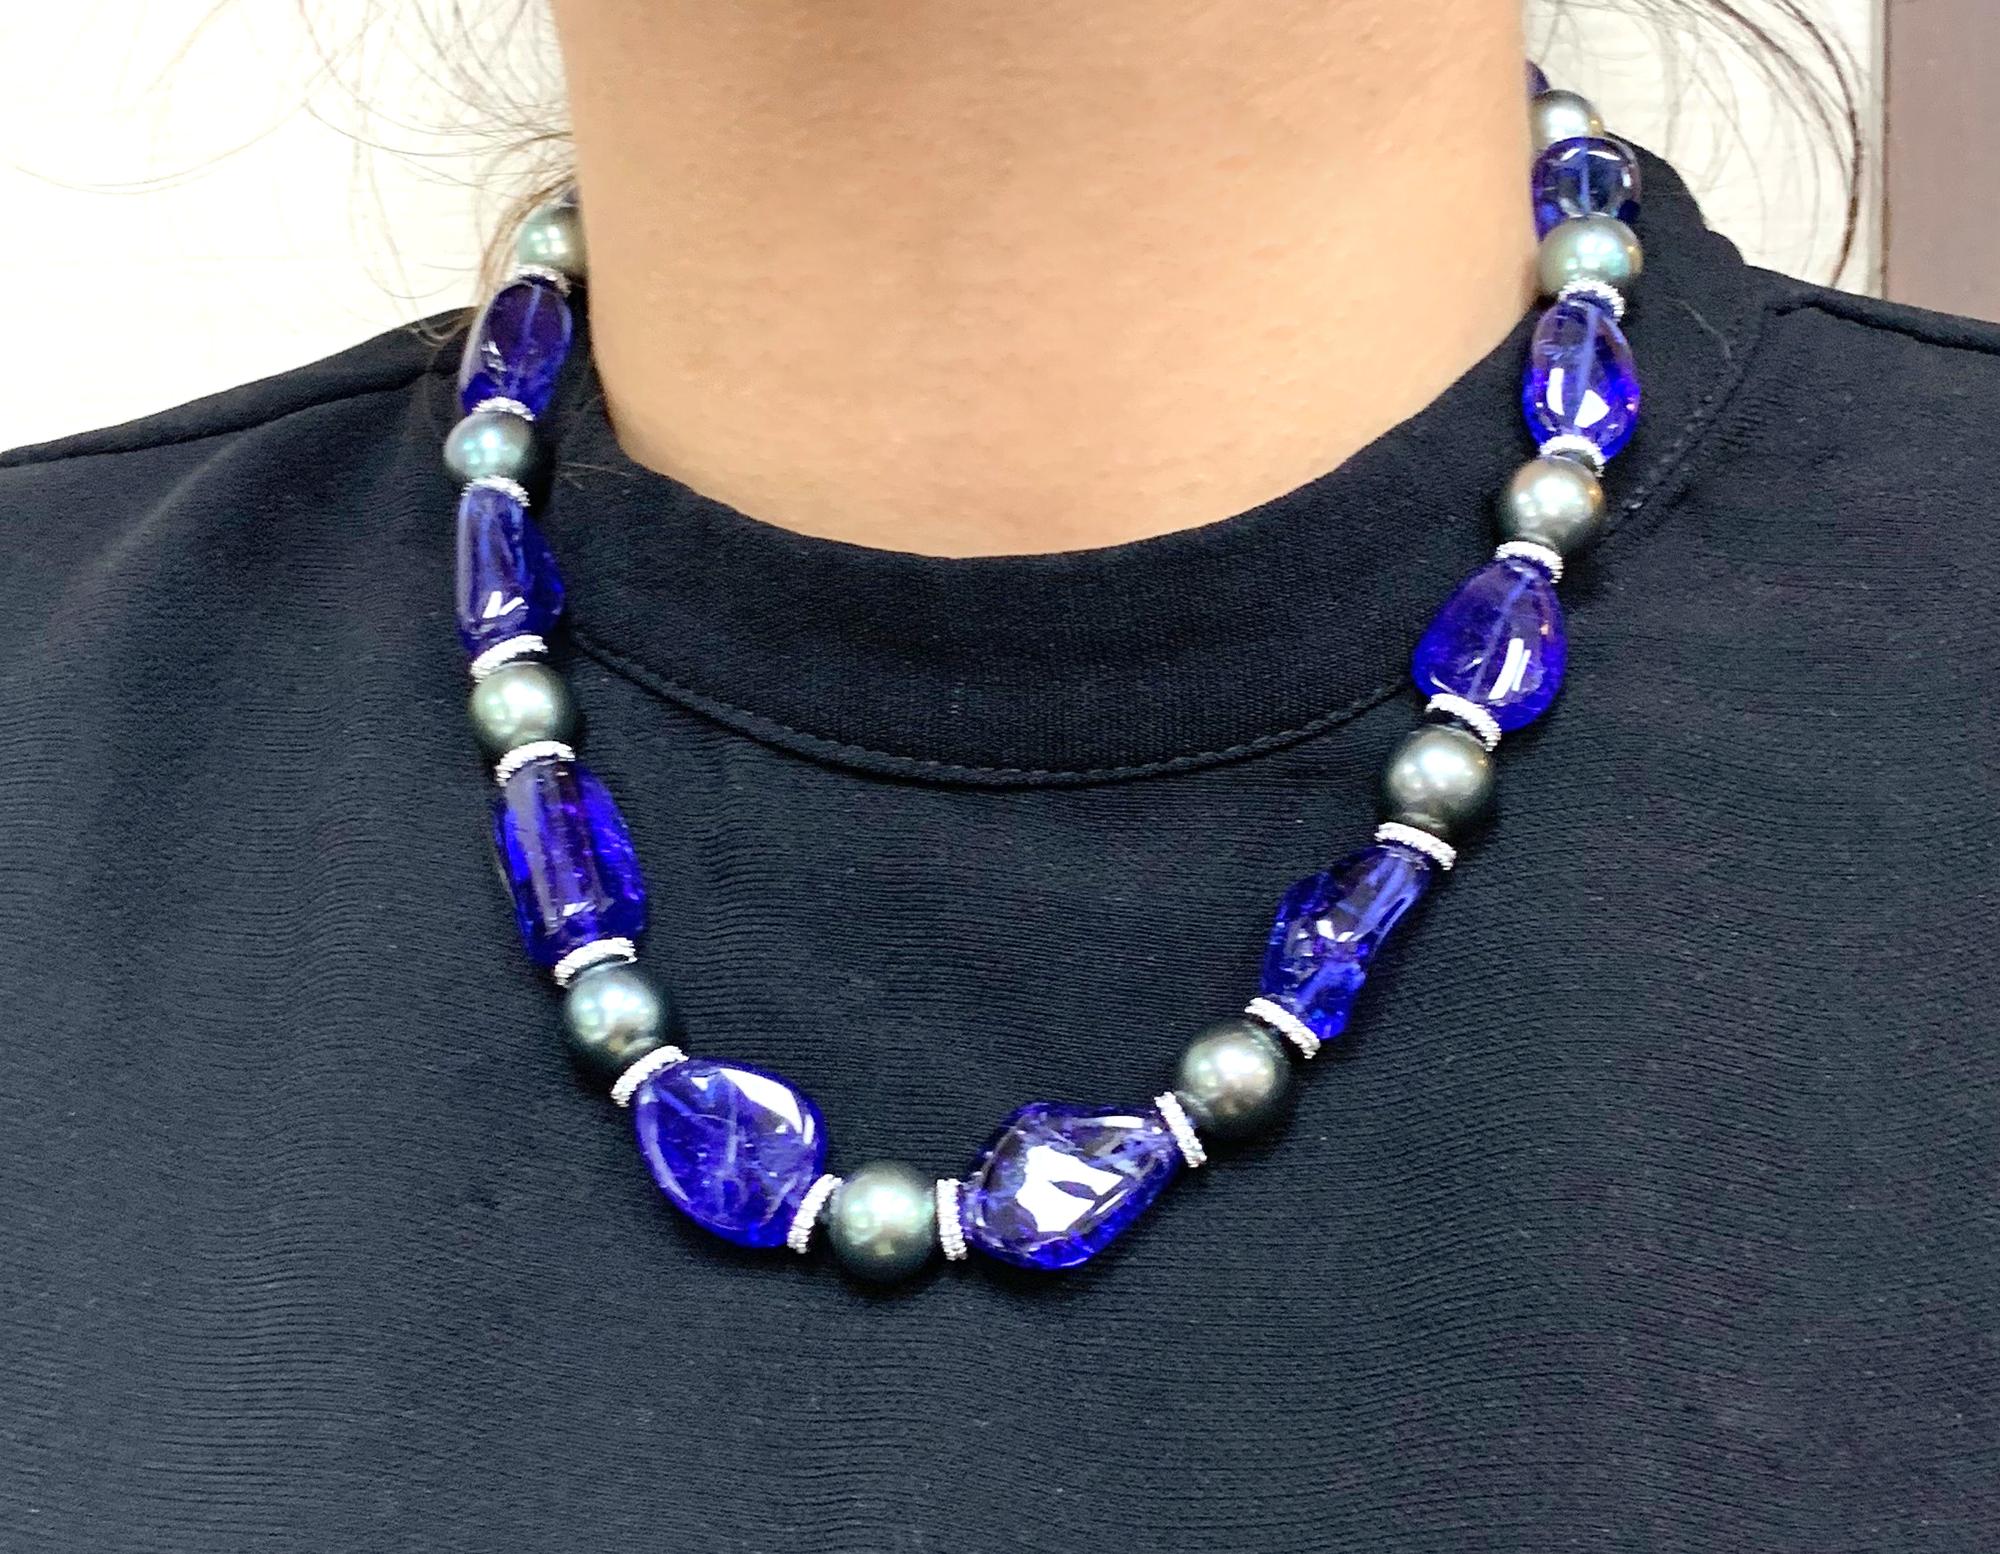 This Tanzanite Tumbled Beads & South Sea Pearls with Diamonds Rondel Necklace in 18K White Gold is a stunning piece of jewelry from the 'G-One' Collection. The necklace features beautiful tanzanite tumbled beads and lustrous South Sea pearls,